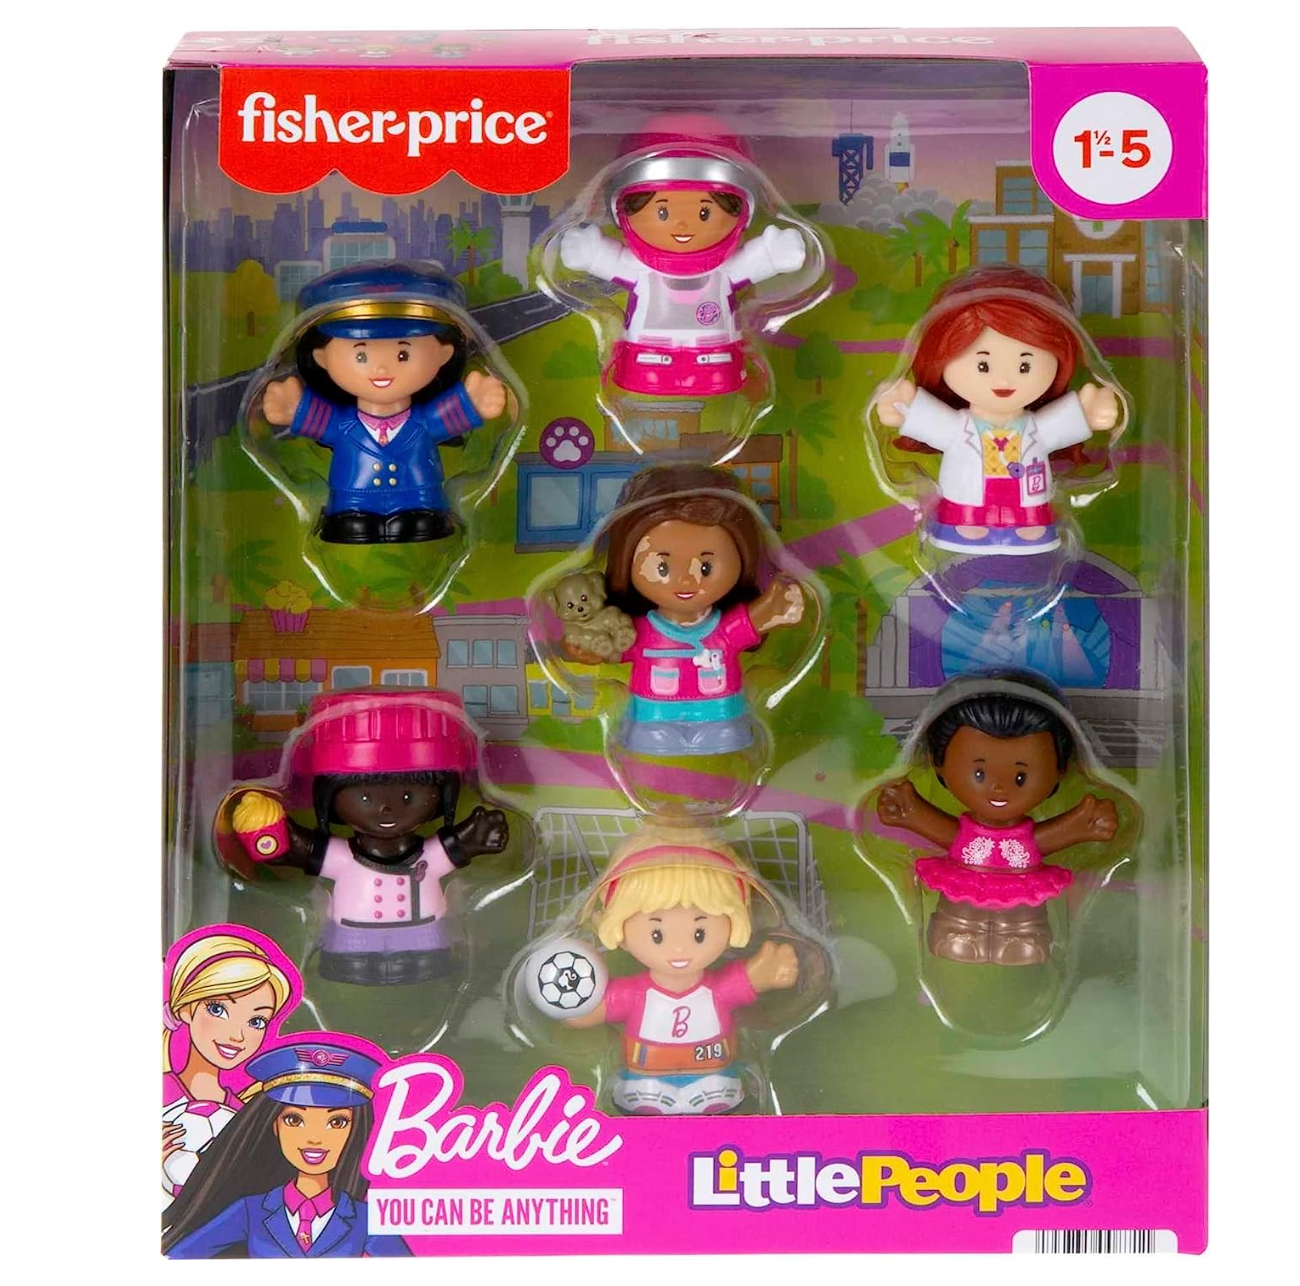 Little People Barbie Toddler Toys, You Can Be Anything Figure Pack, 7 Characters for Pretend Play Ages 18+ Months